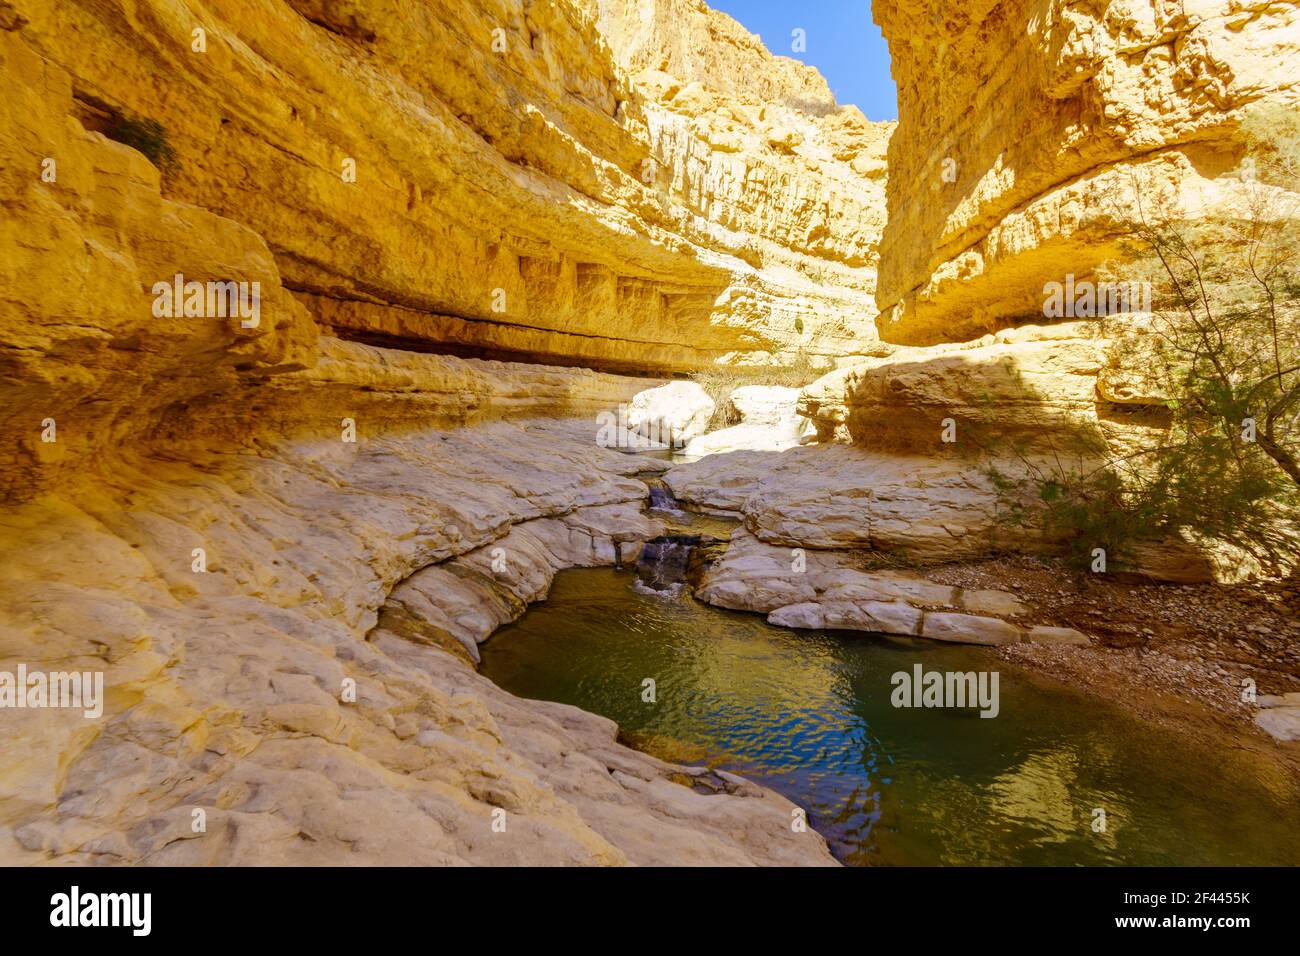 View of upper pools along the Arugot stream, in Ein Gedi Nature Reserve, near the Dead Sea, Southern Israel Stock Photo - Alamy